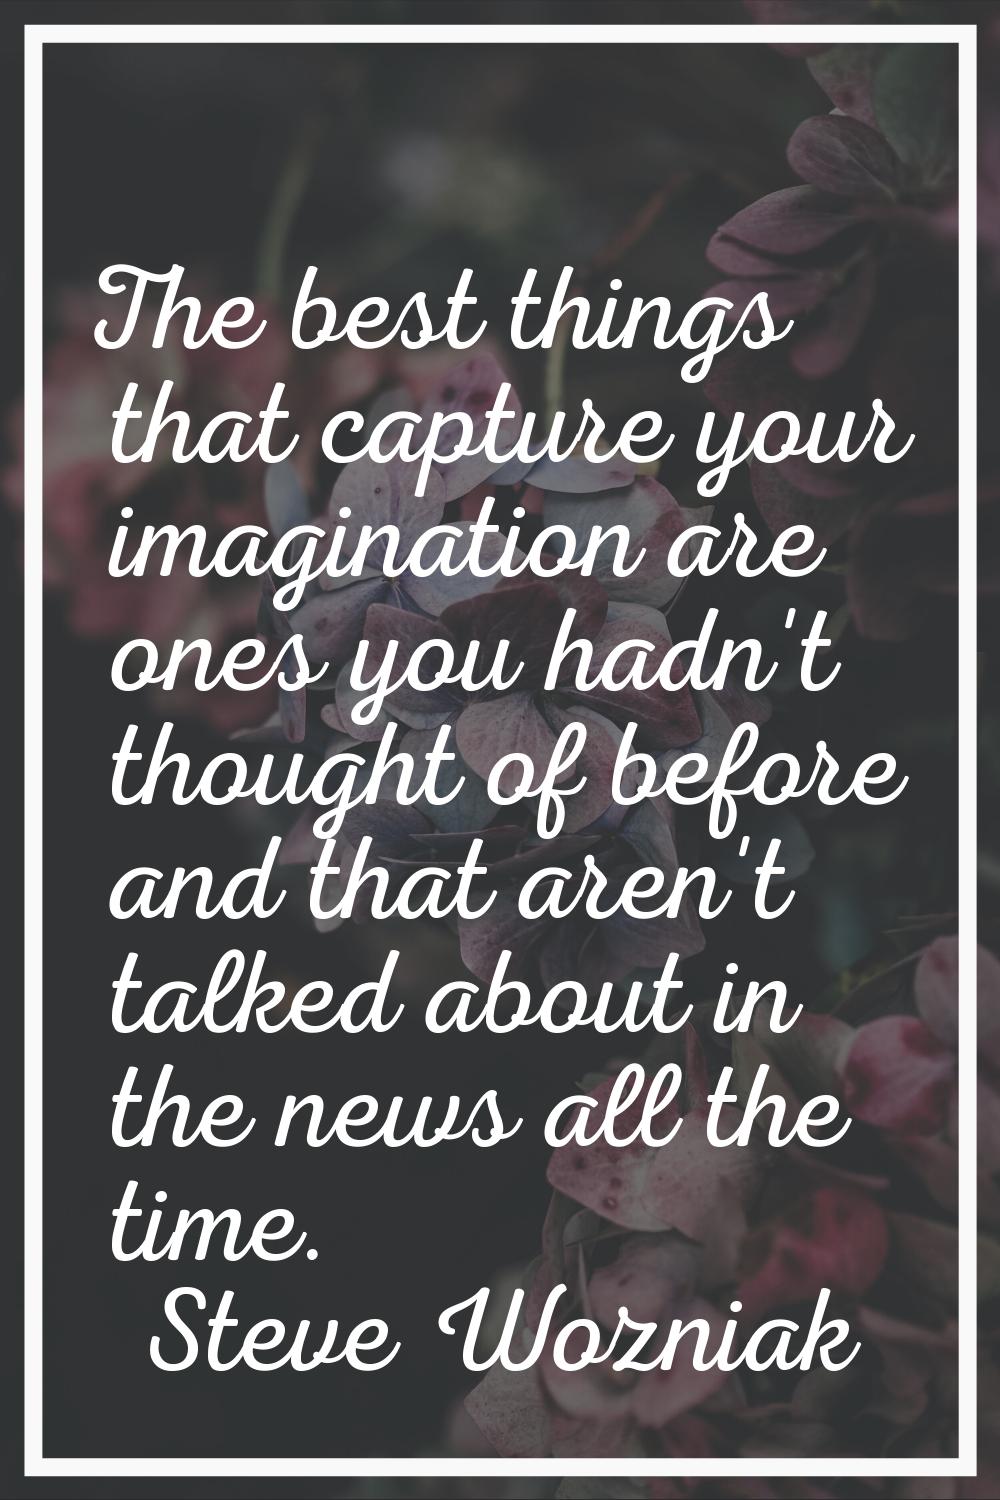 The best things that capture your imagination are ones you hadn't thought of before and that aren't